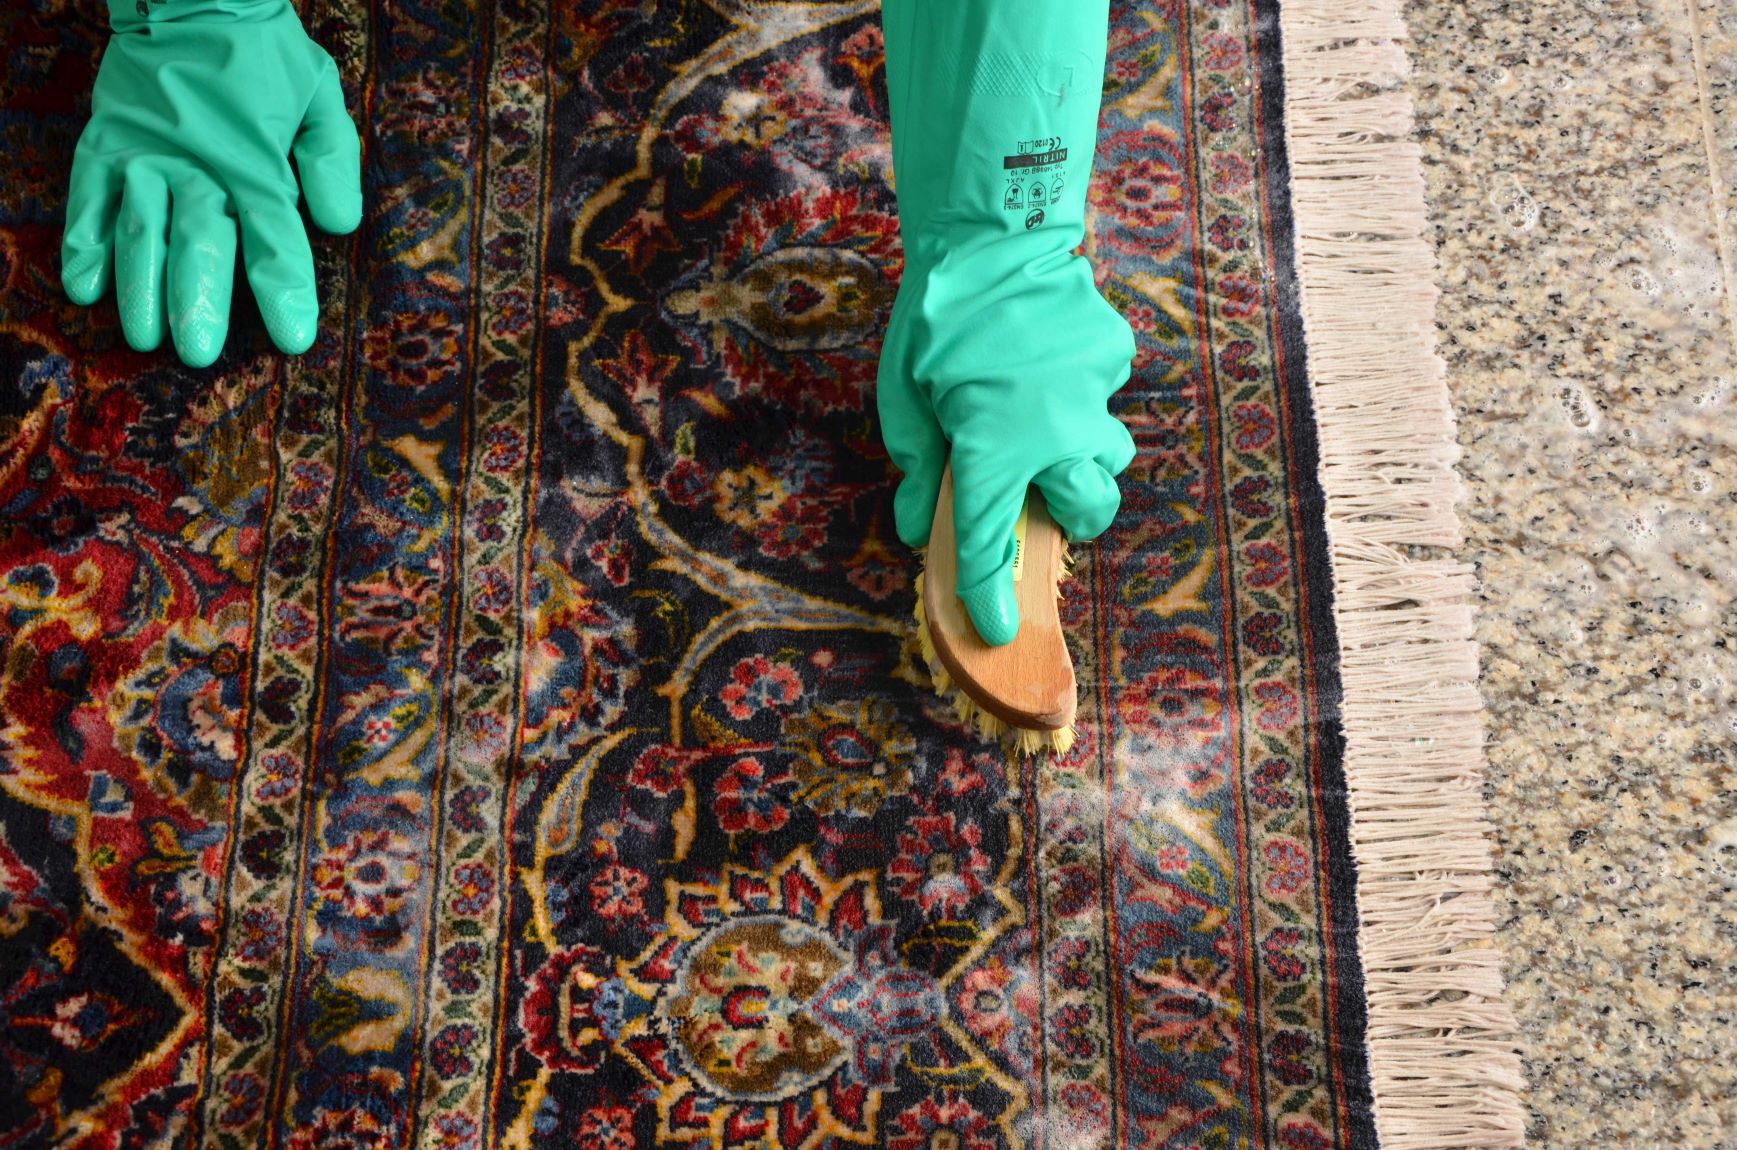 How you can vaccum and clean your oriental rug?